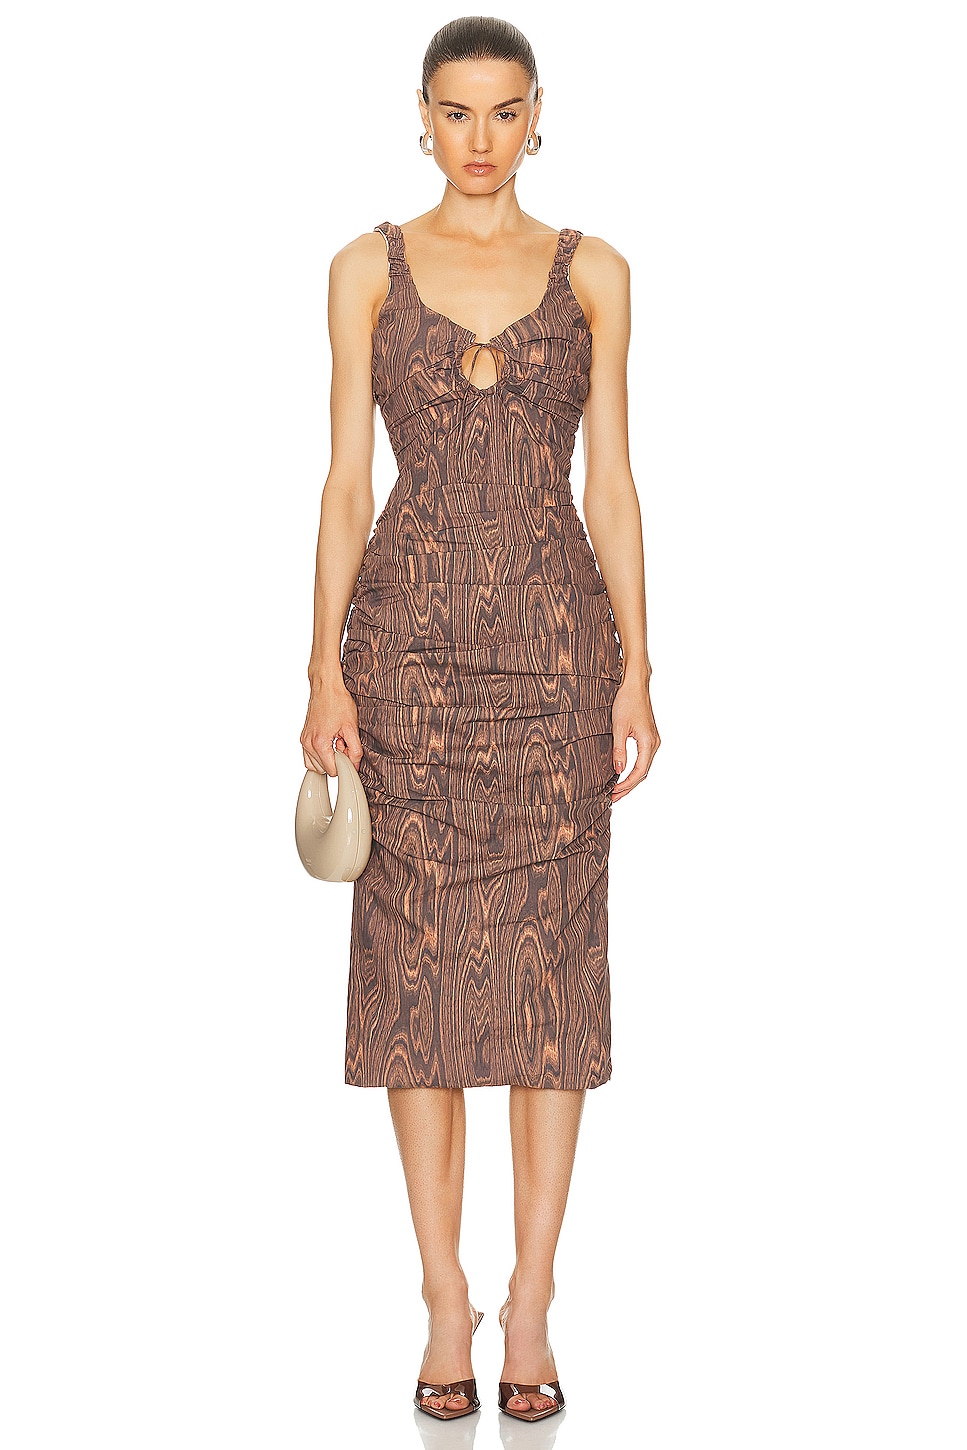 Image 1 of Maisie Wilen Lady Miss Dress in Wood